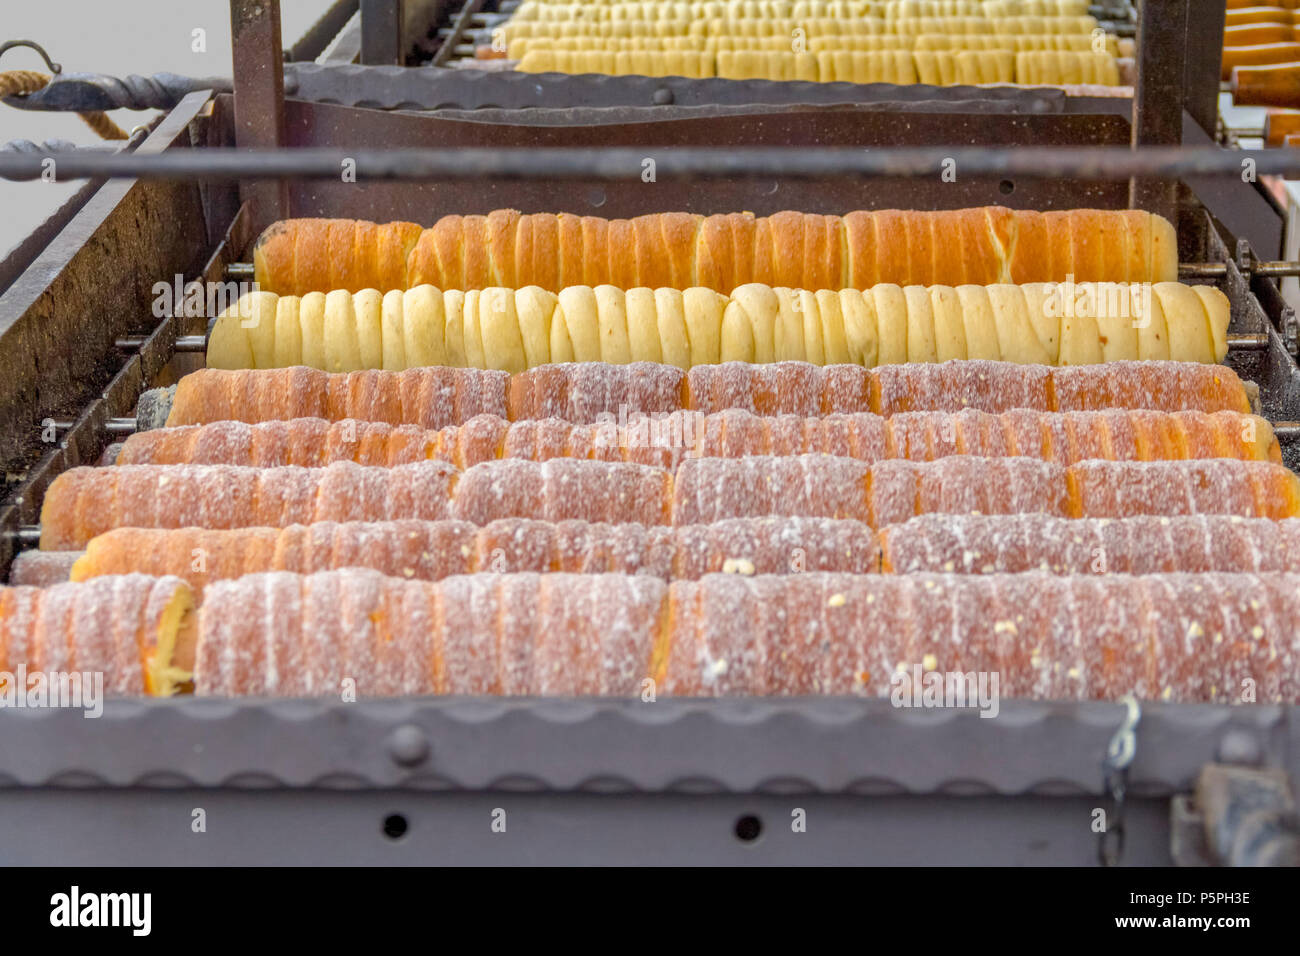 mostly central european spit cake speciality named Trdelnik rotating on a grill seen in the Czech Republic Stock Photo